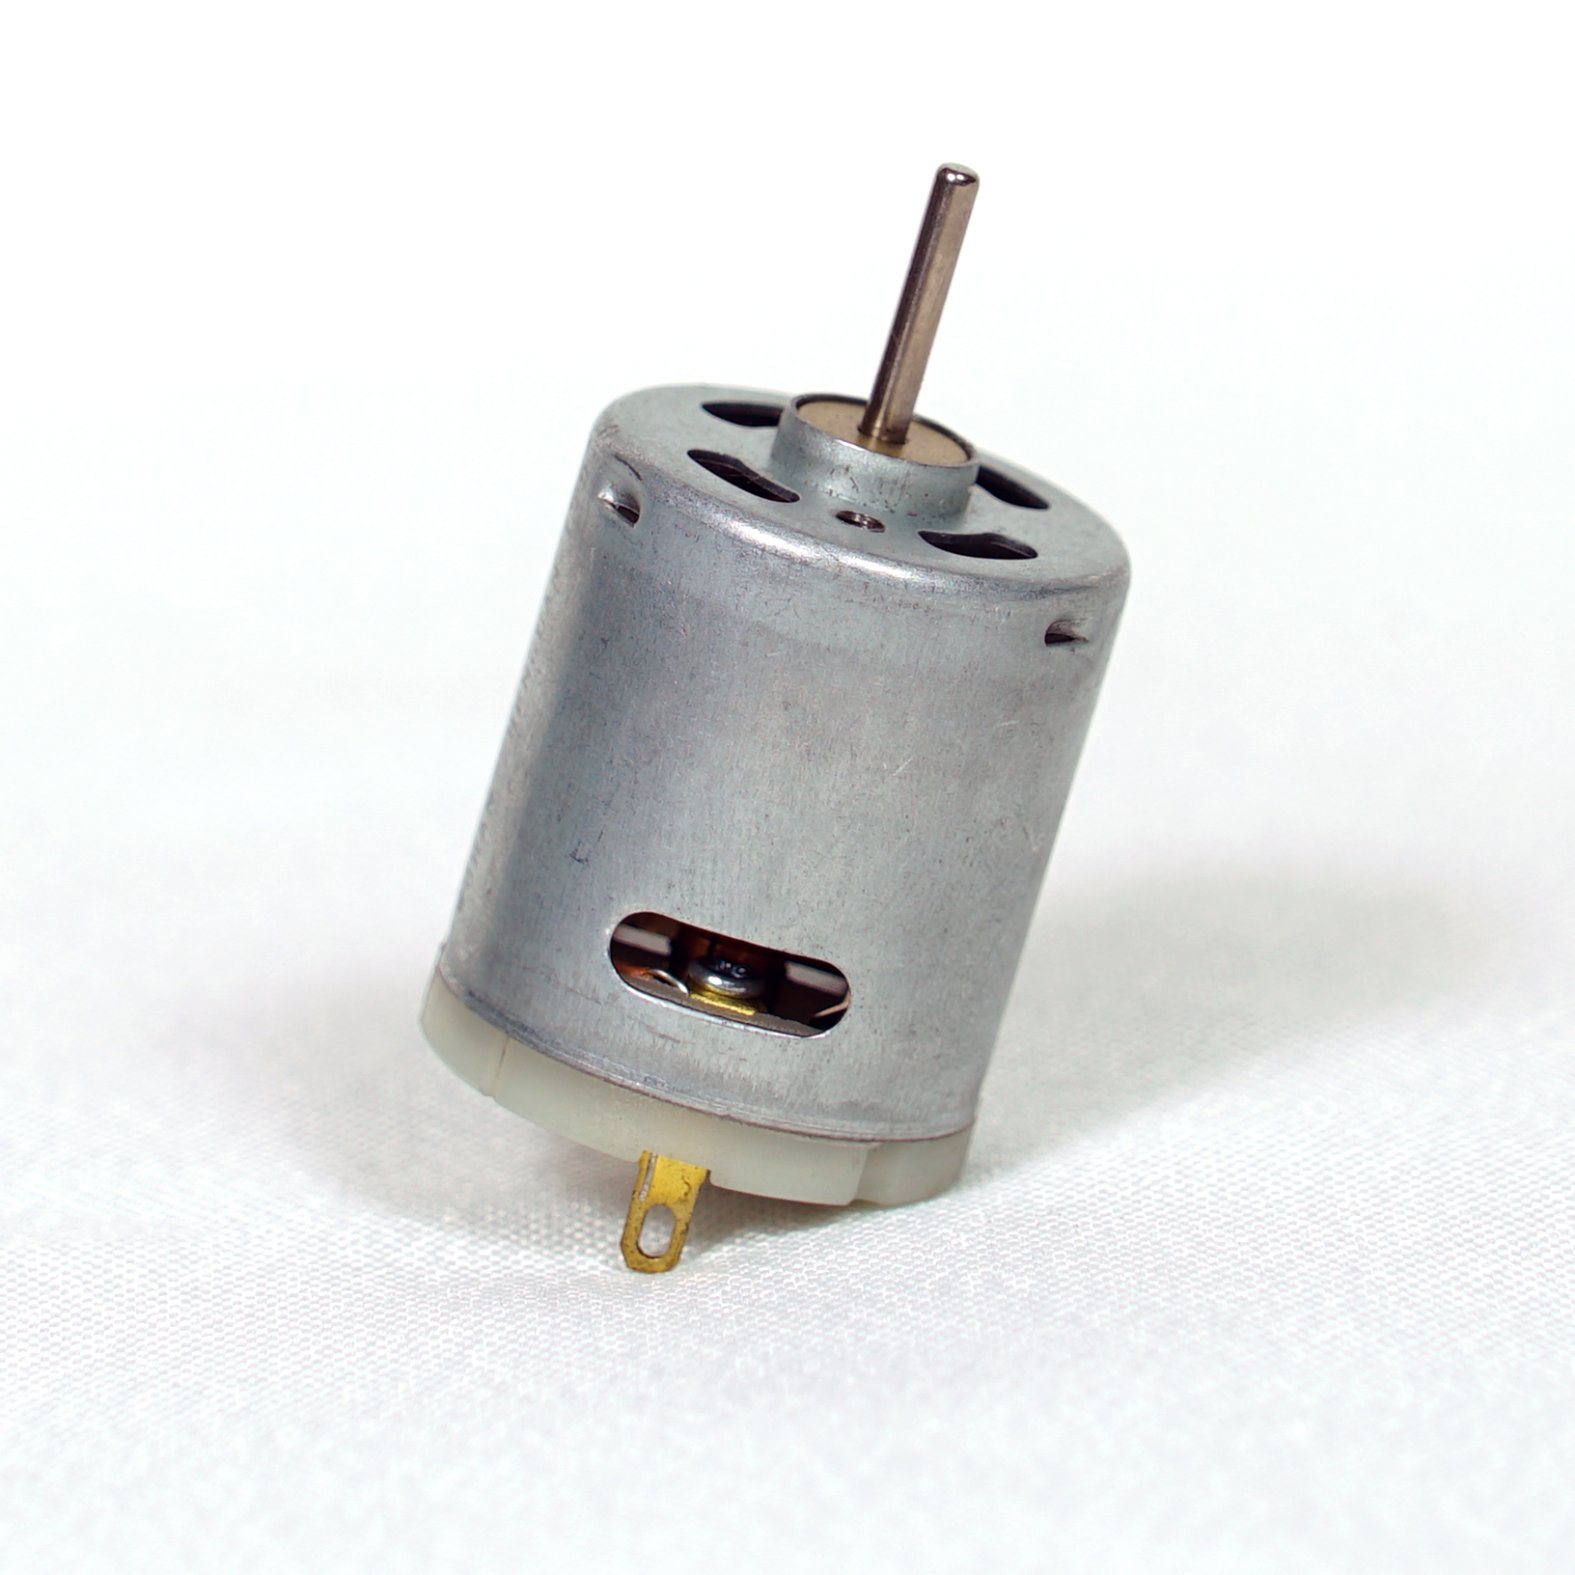 small DC motor for home appliances